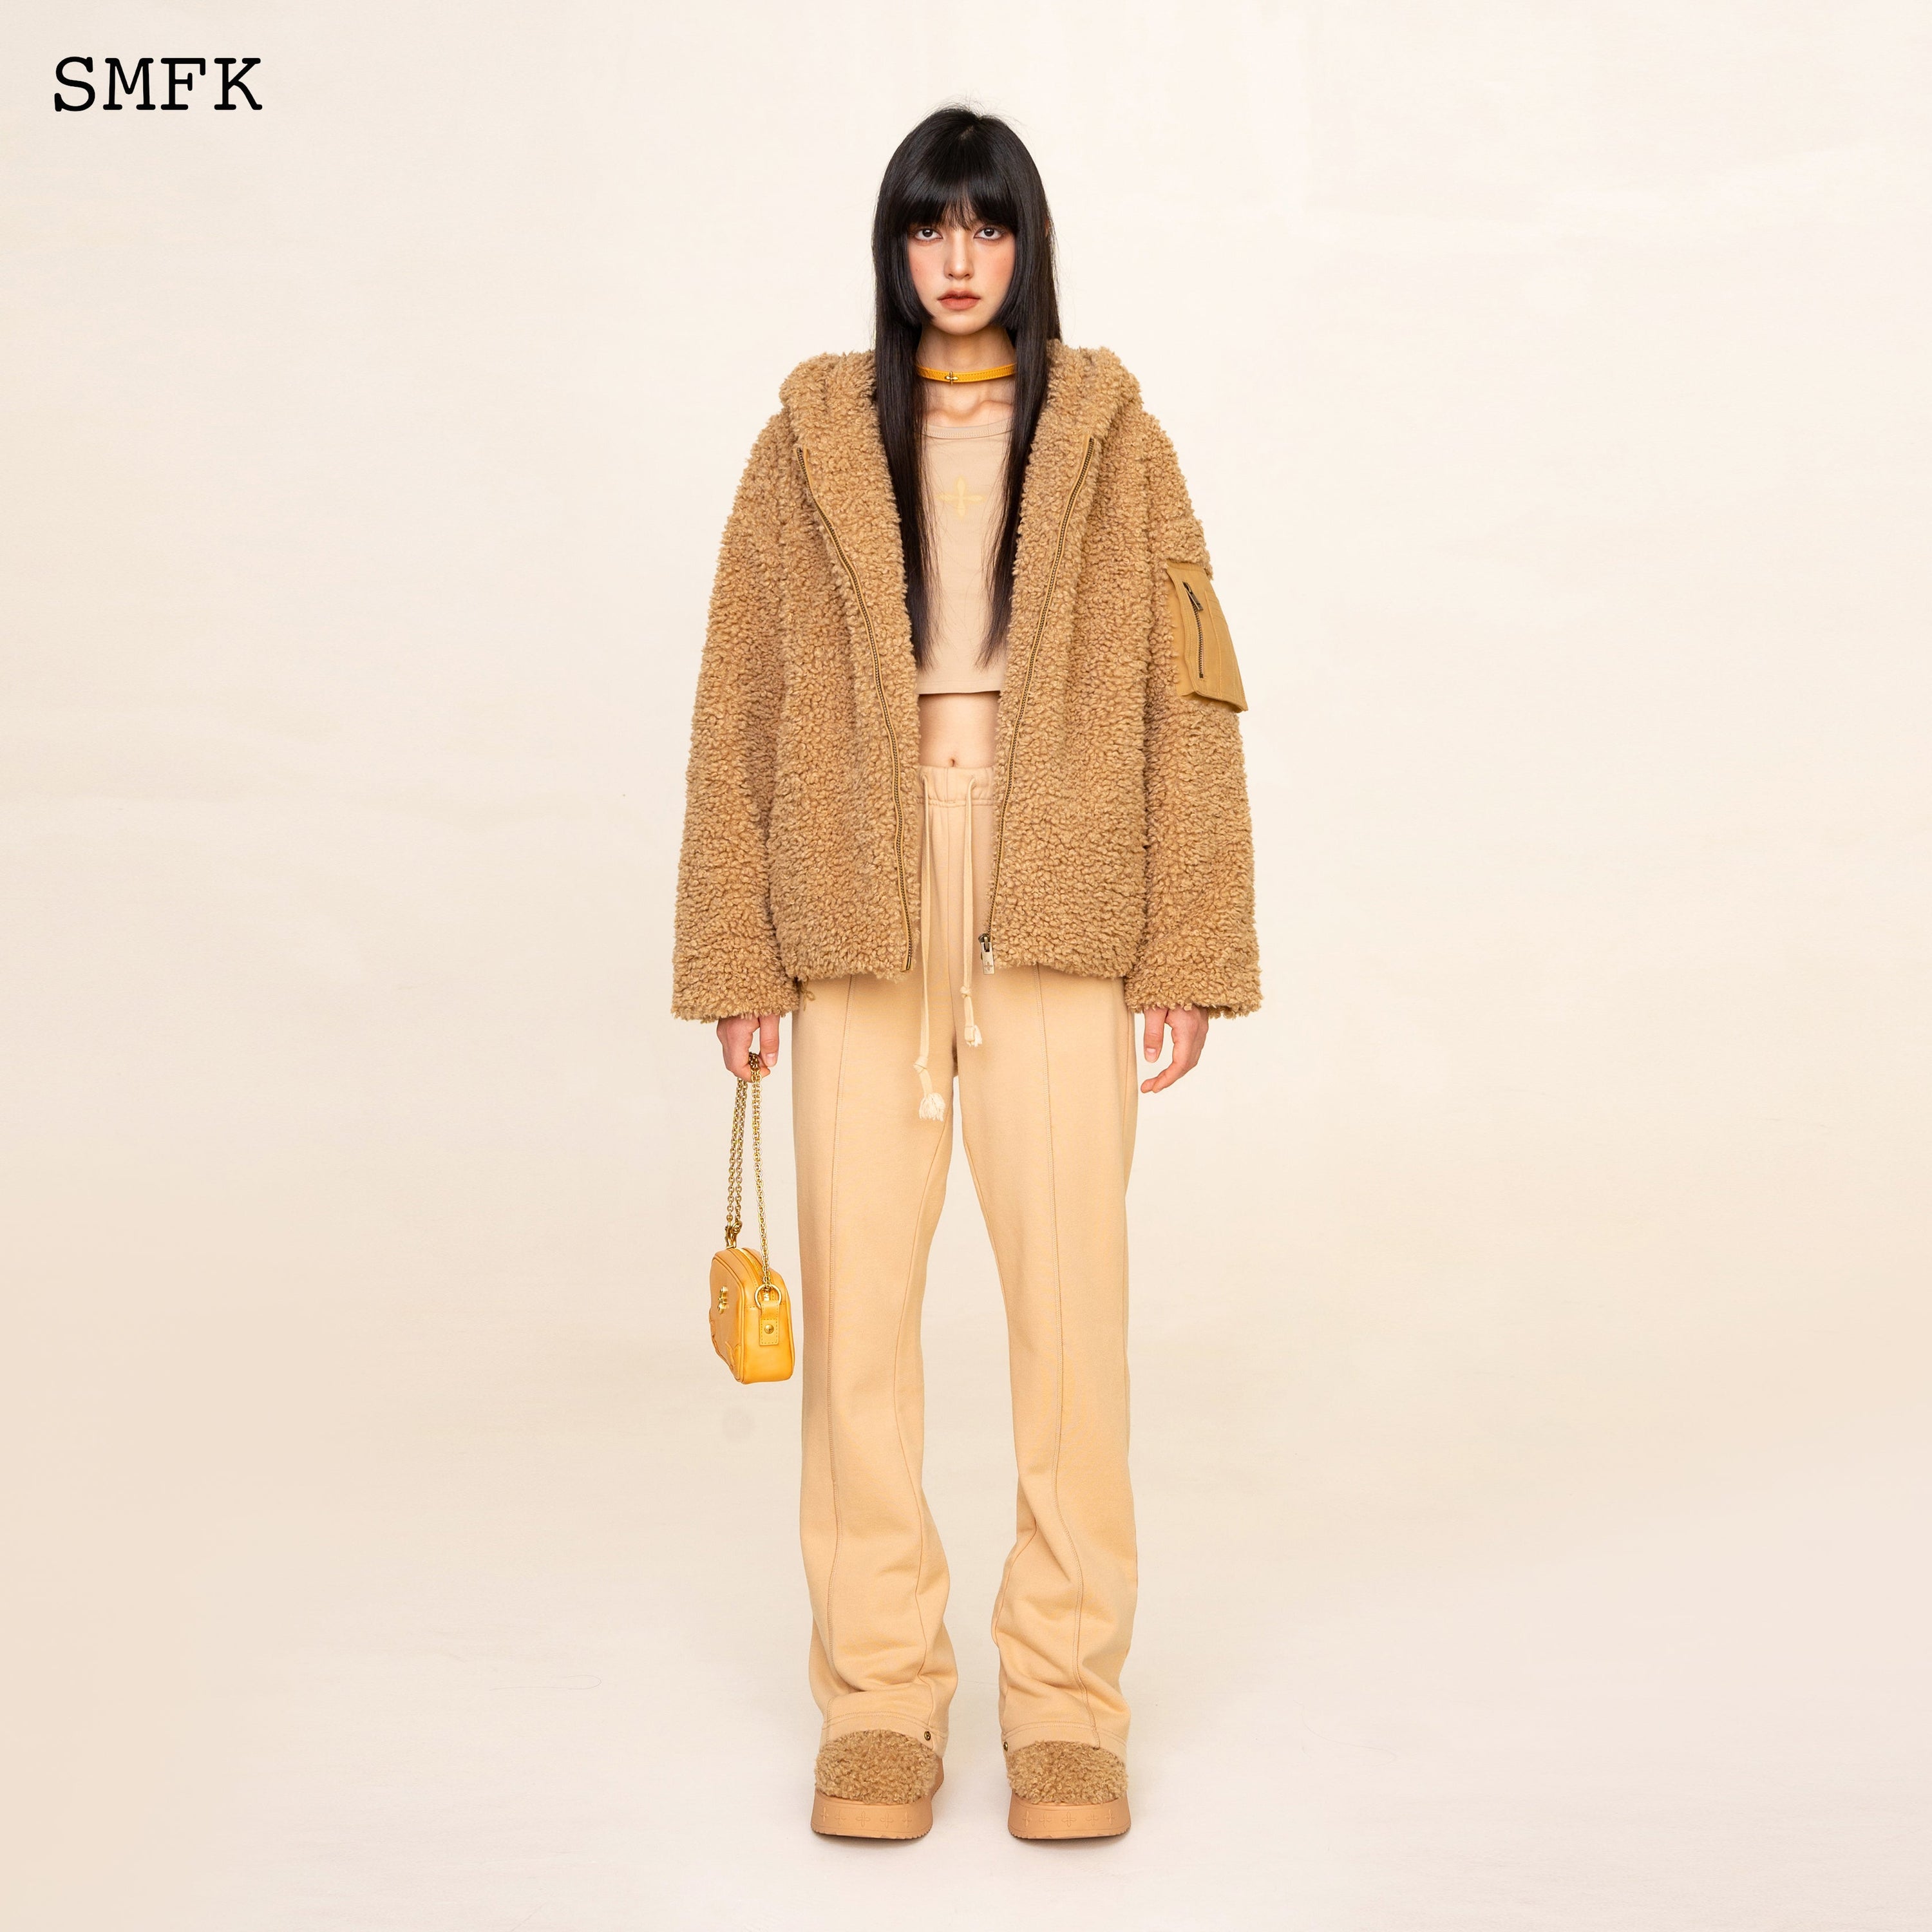 WildWorld Adventure Outdoor Faux Fur Hoodie In Wheat - SMFK Official